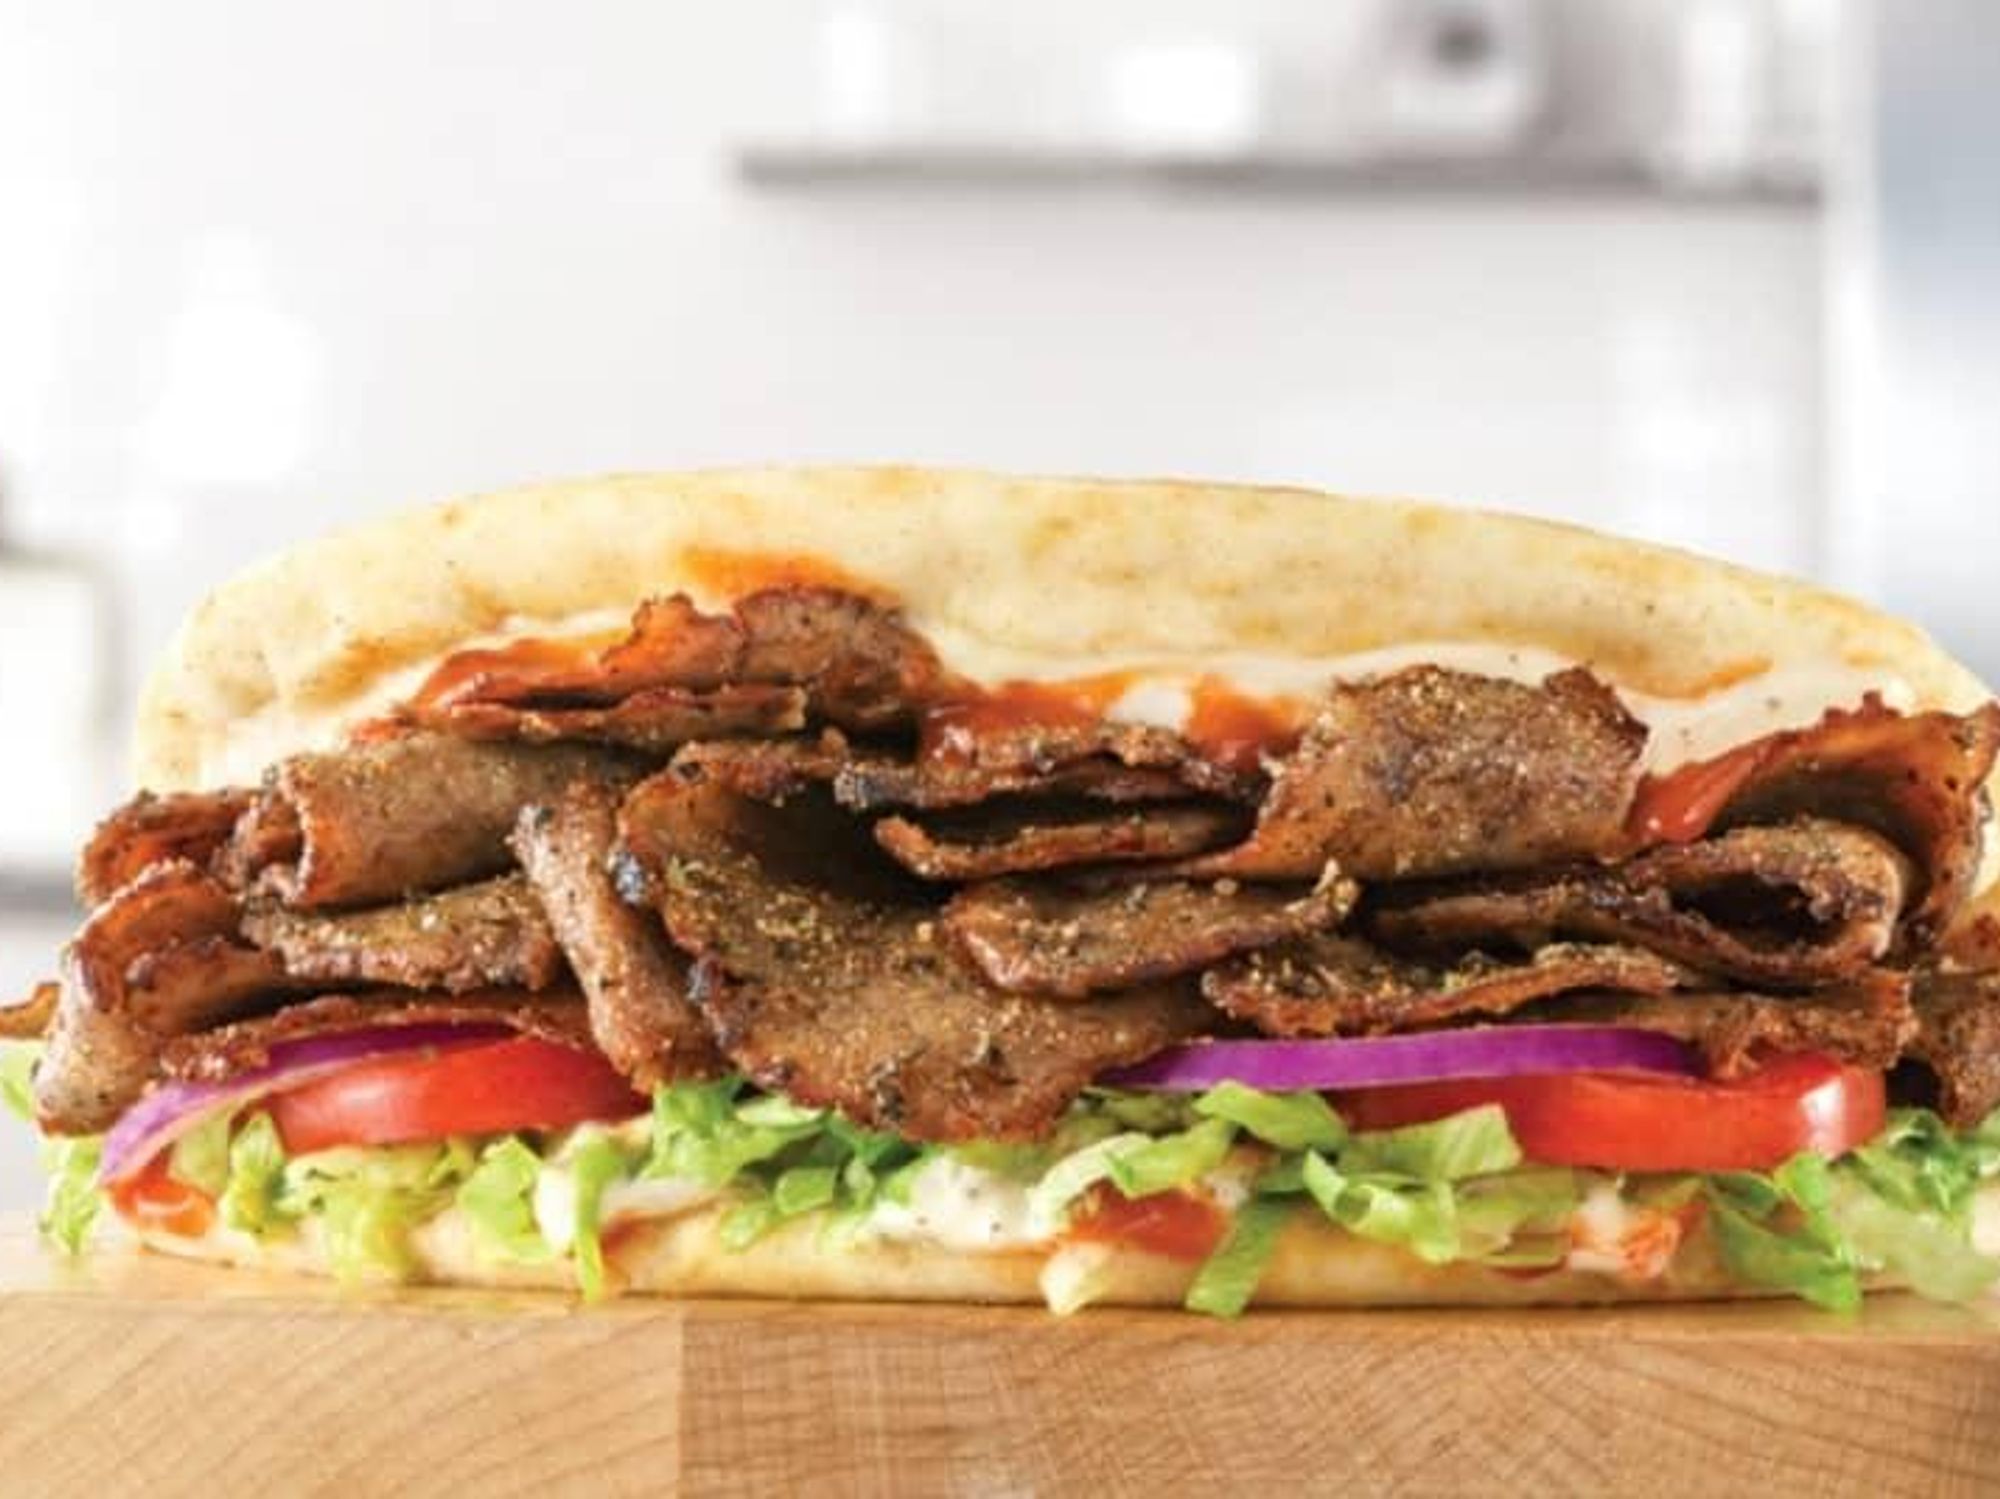 Arby's goes Greek with spicy and meaty new gyro - CultureMap Houston